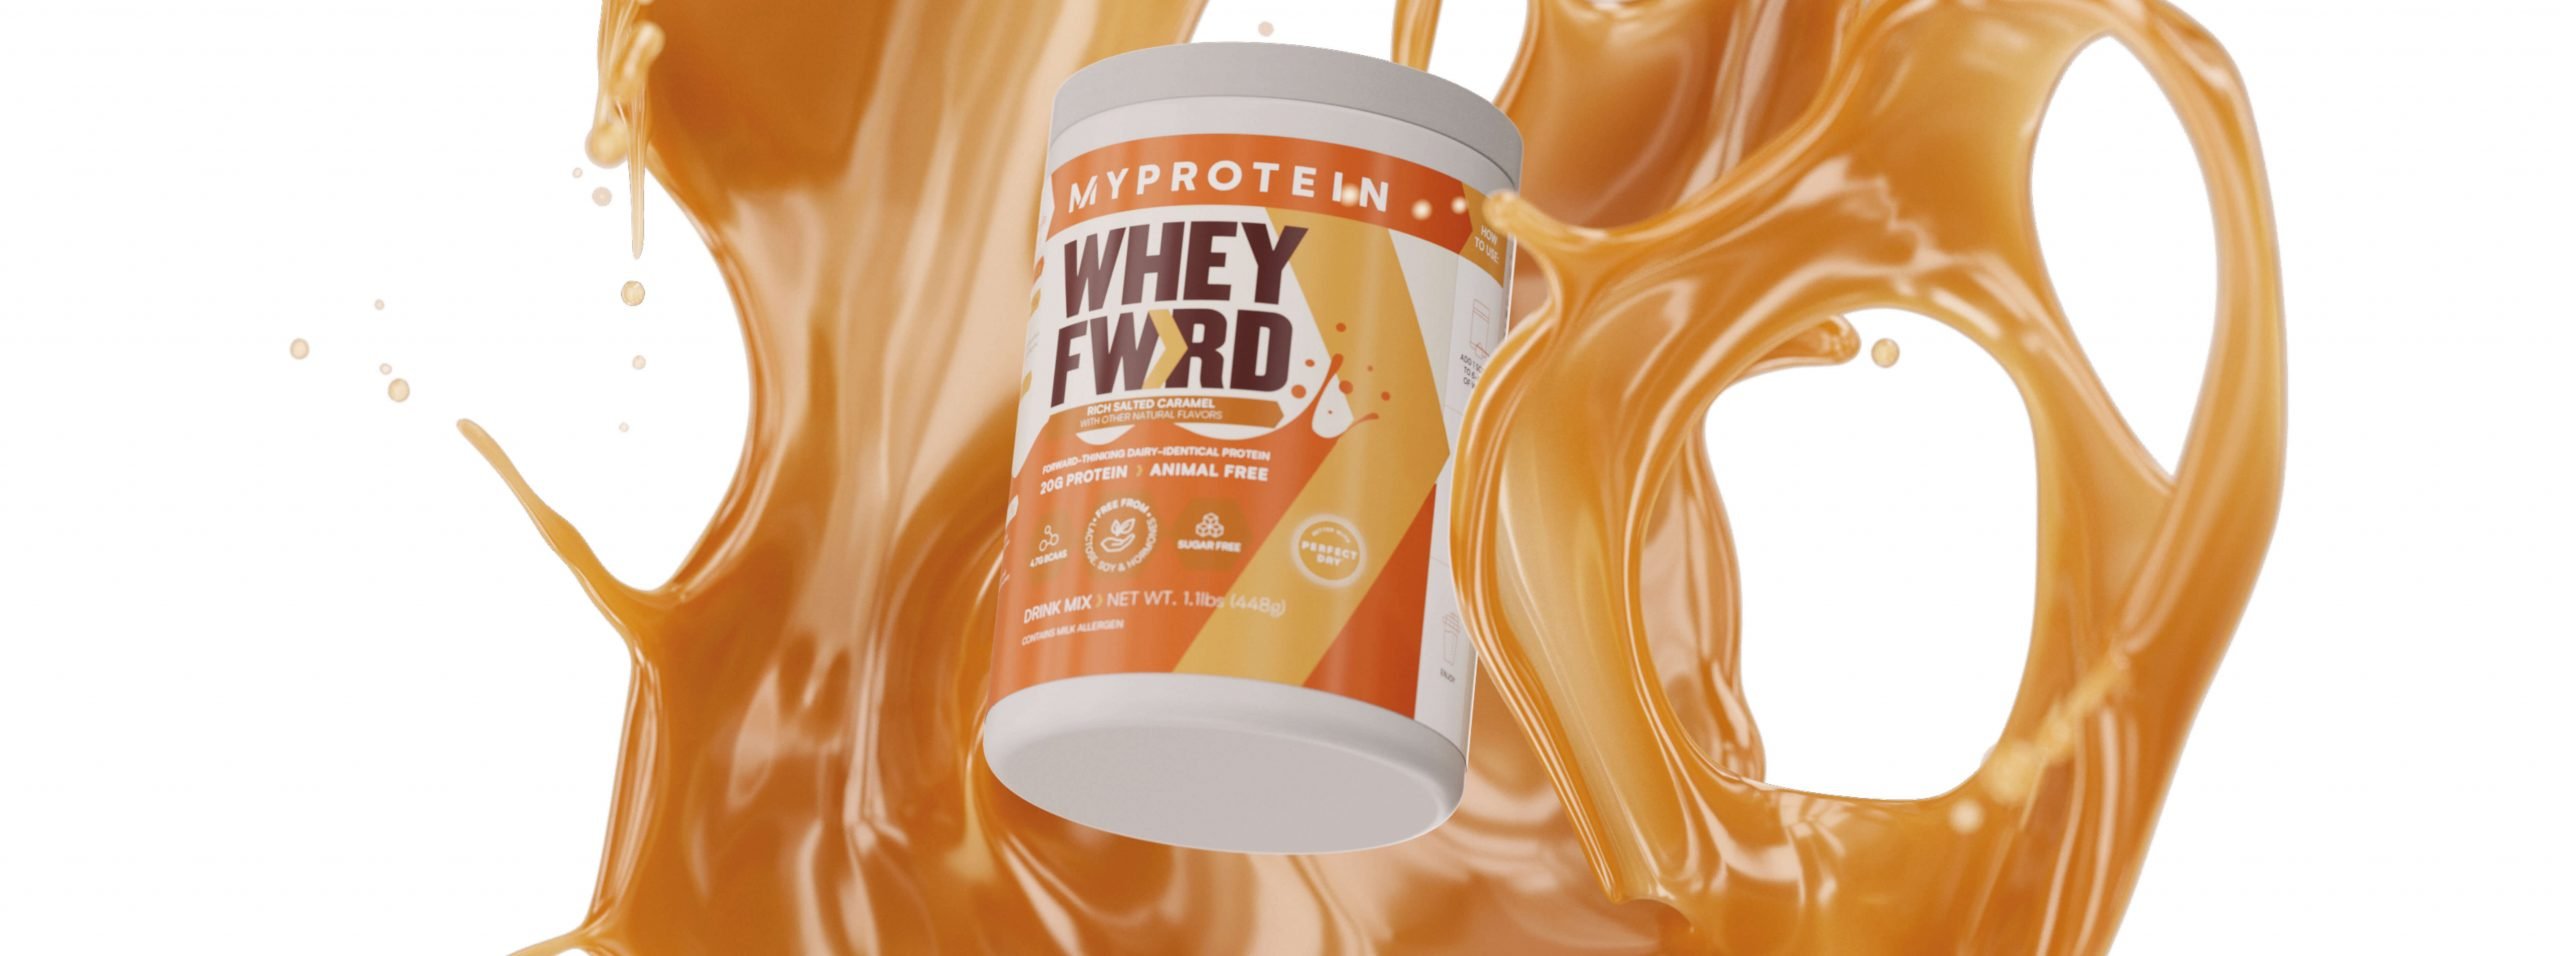 Something New Is Coming | ‘Whey Forward’ Is Animal-Free Whey Protein